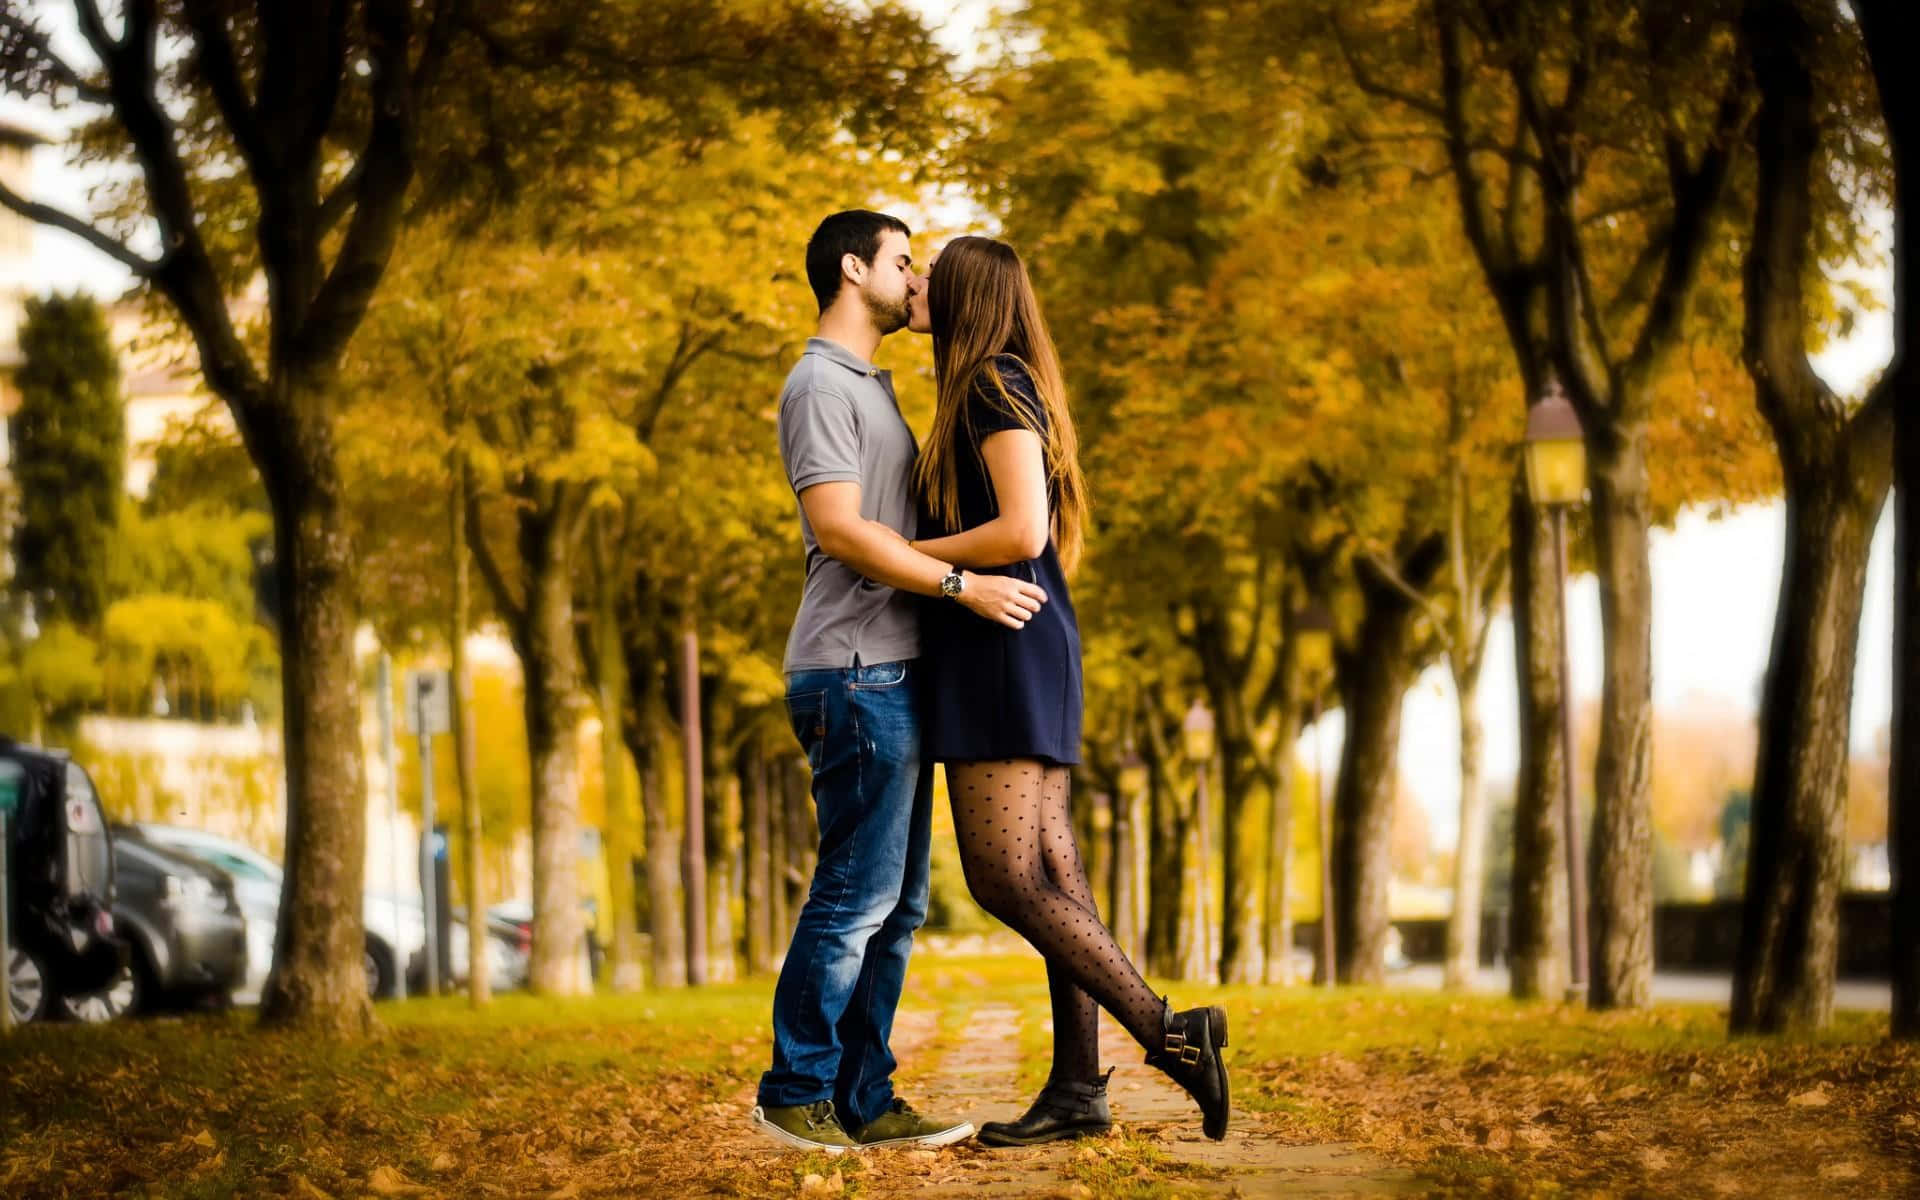 Couple Profile Picture Background Images, HD Pictures and